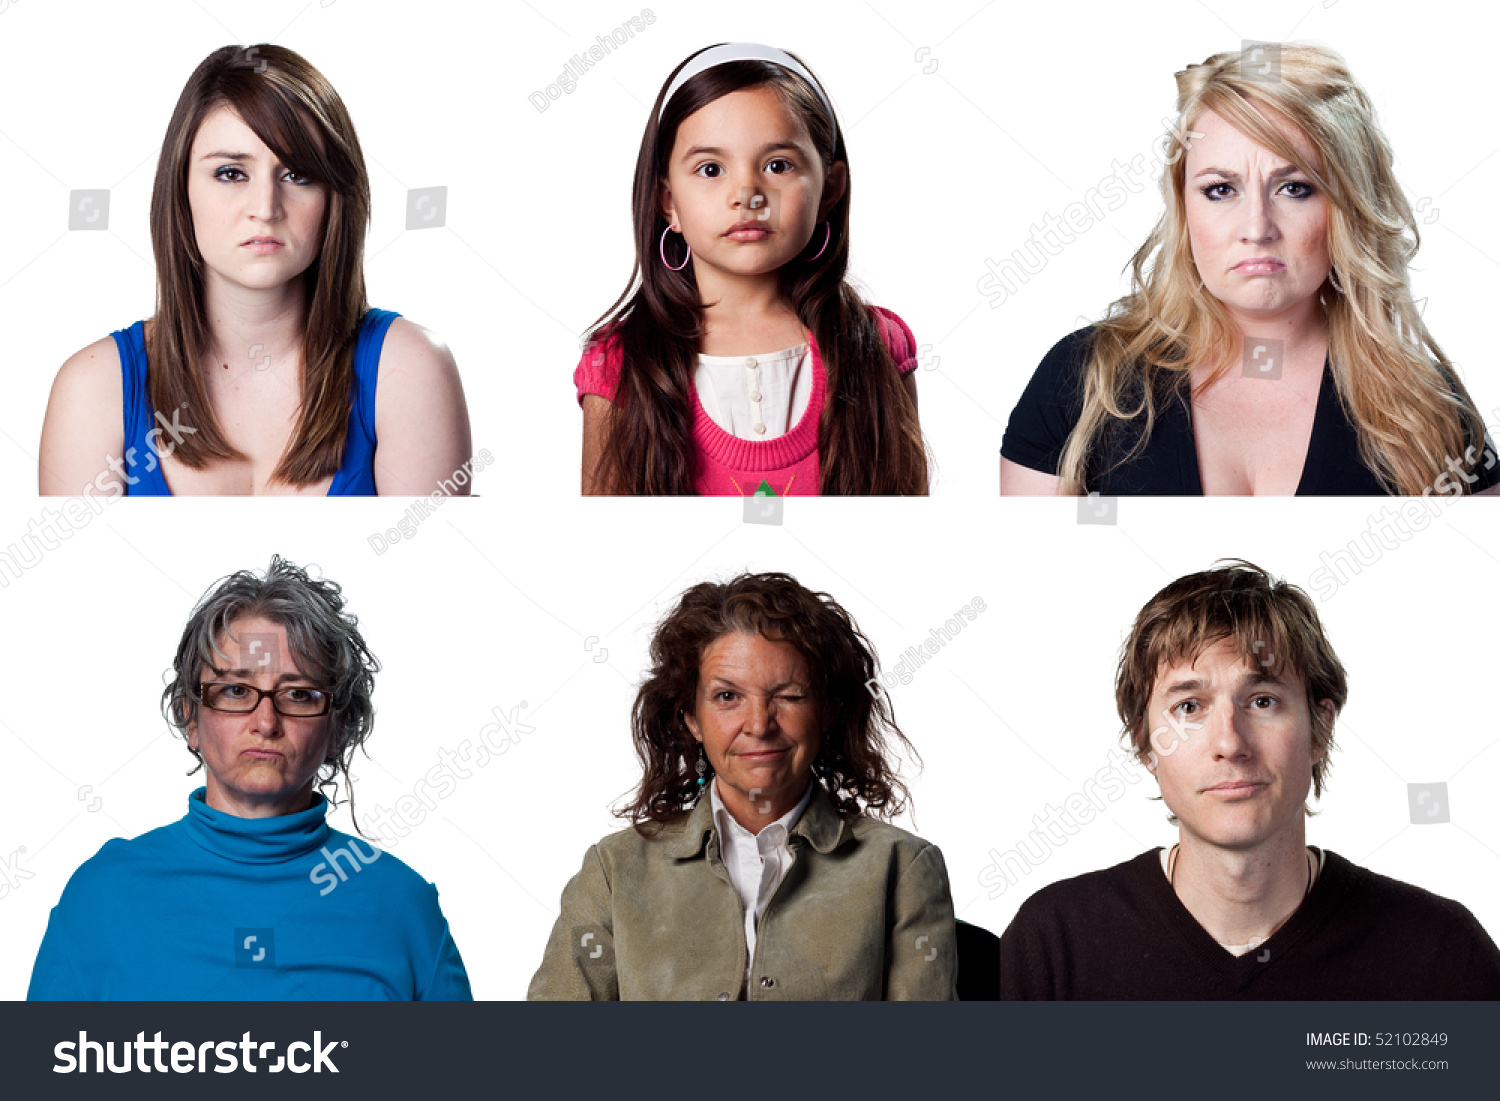 Group Sad People Six Isolated Images Stock Photo 52102849 - Shutterstock